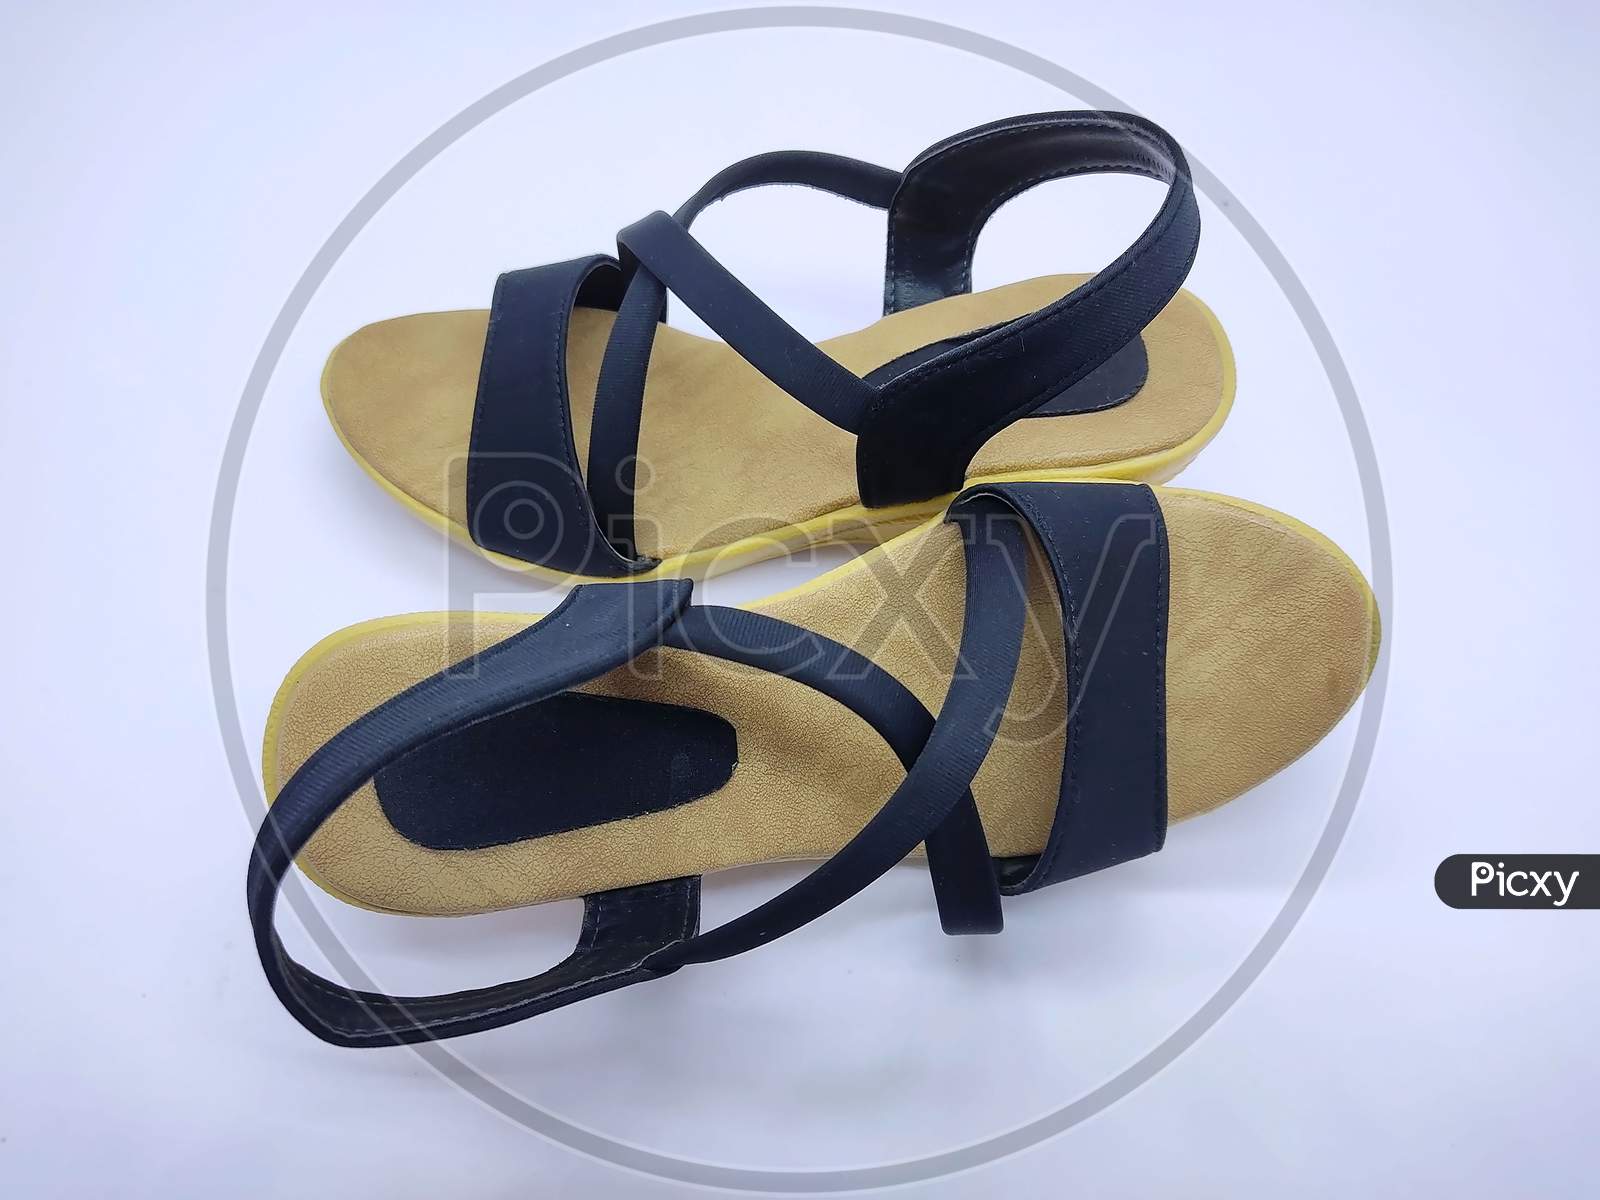 Women'S Sandals Shoes, Ladies Sandal, Female Leather Slippers, New Pair Of Stylish Brown High Heels With Cork Soles, Beautiful Shoes For Ladies On White Background